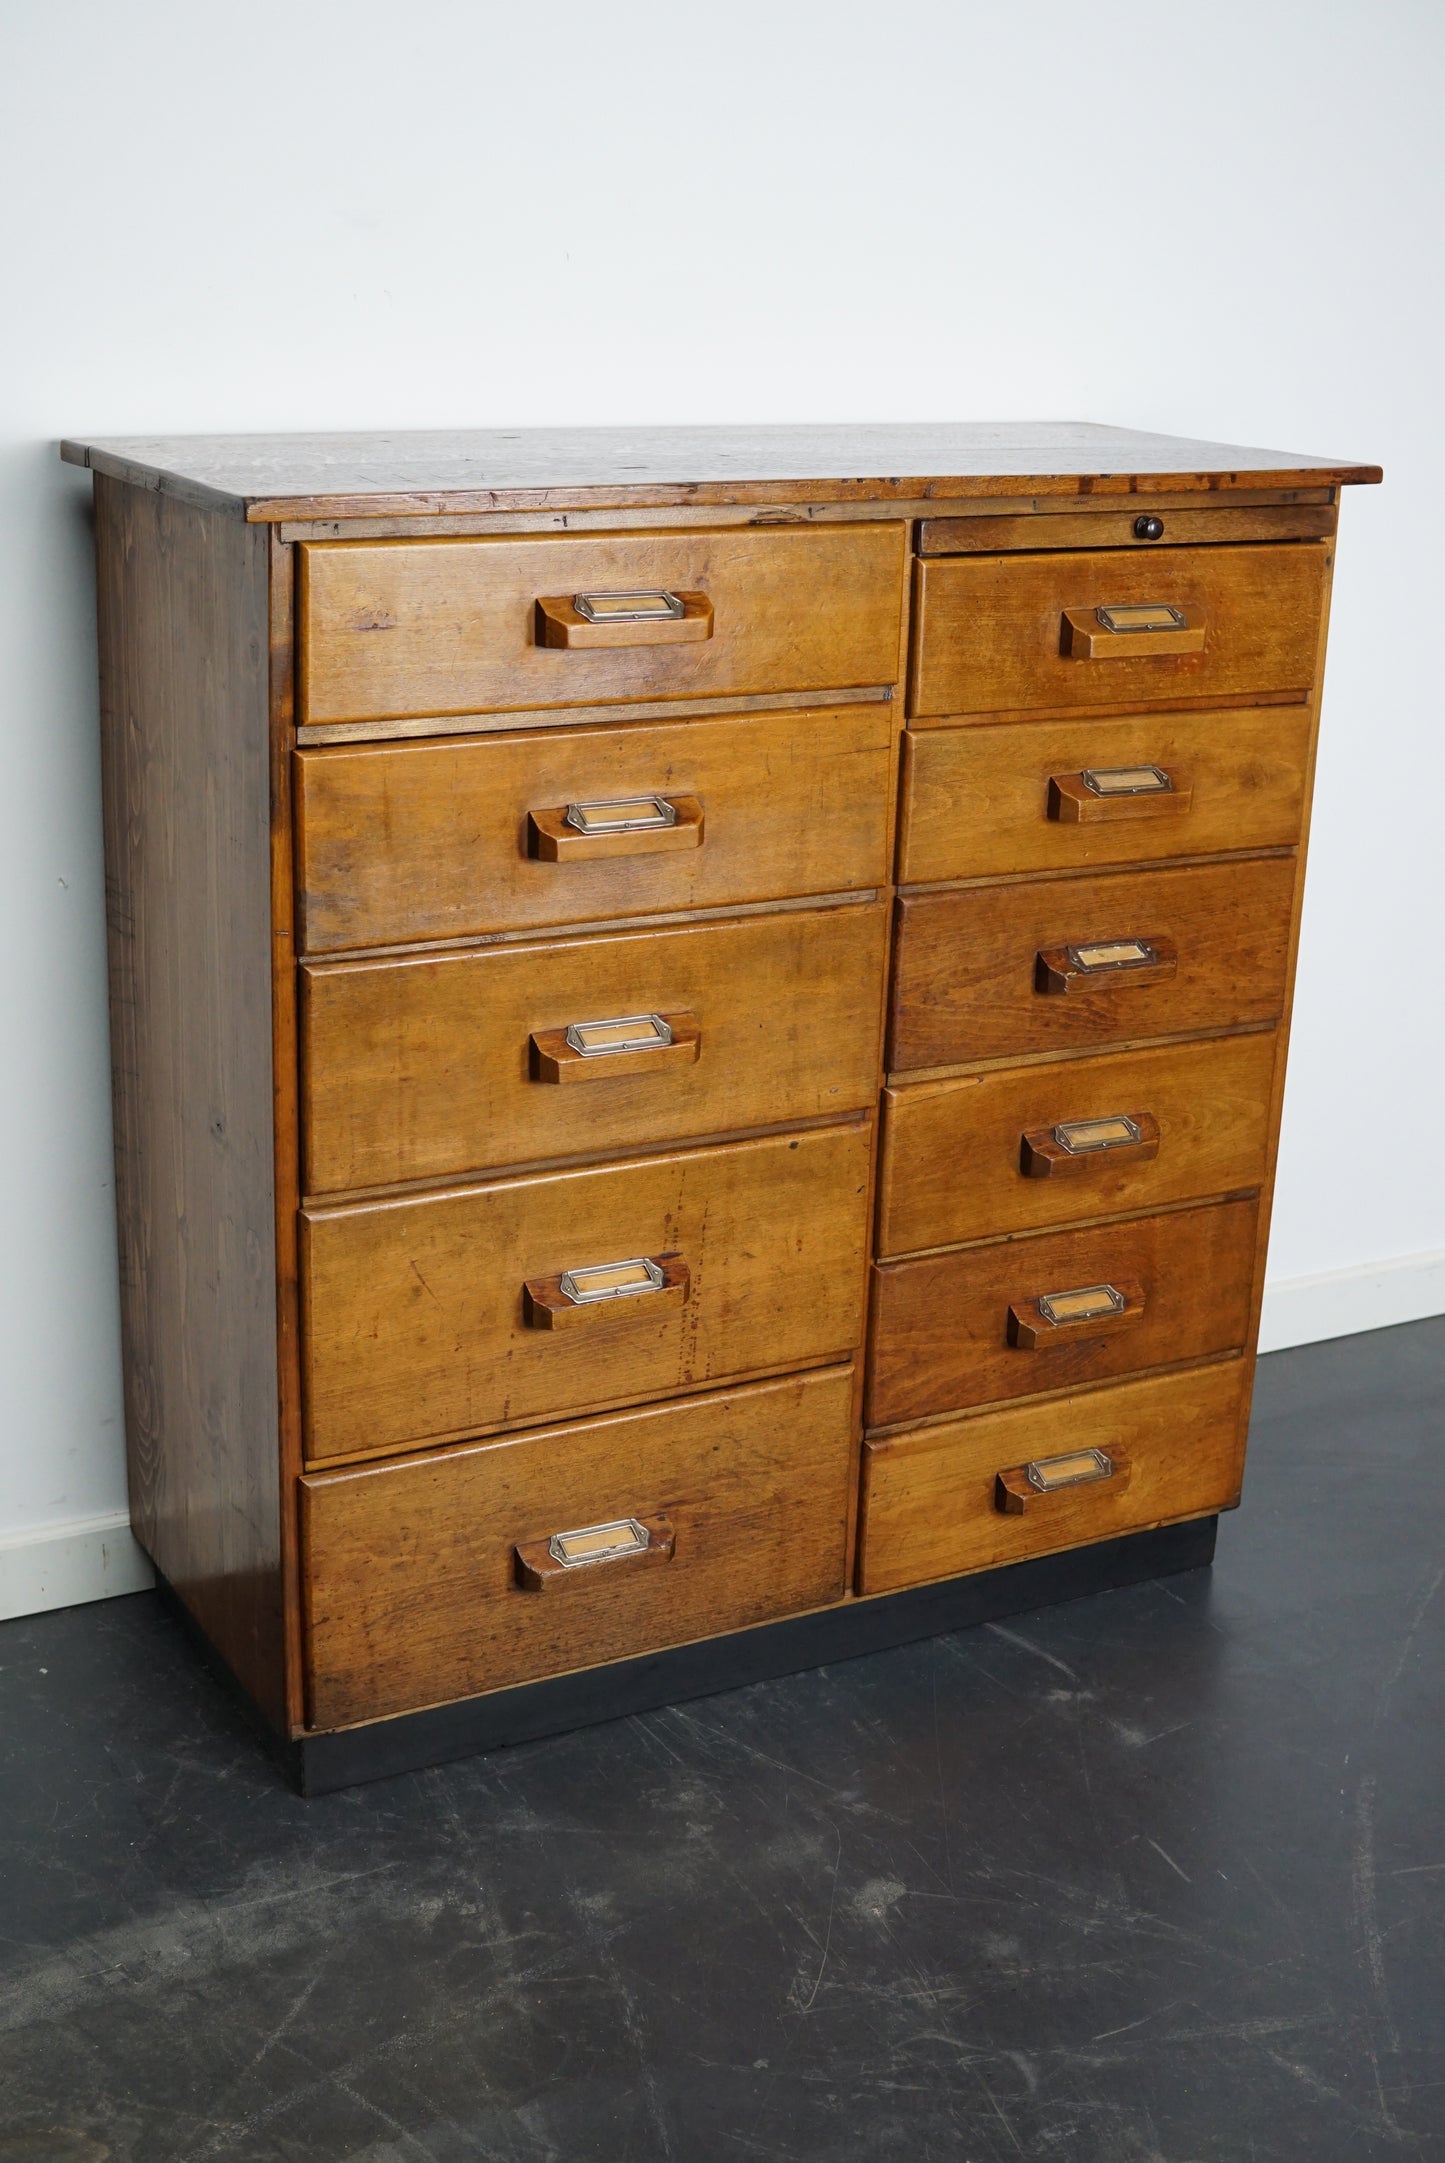 German Industrial Beech and Oak Apothecary Cabinet, Mid-20th Century